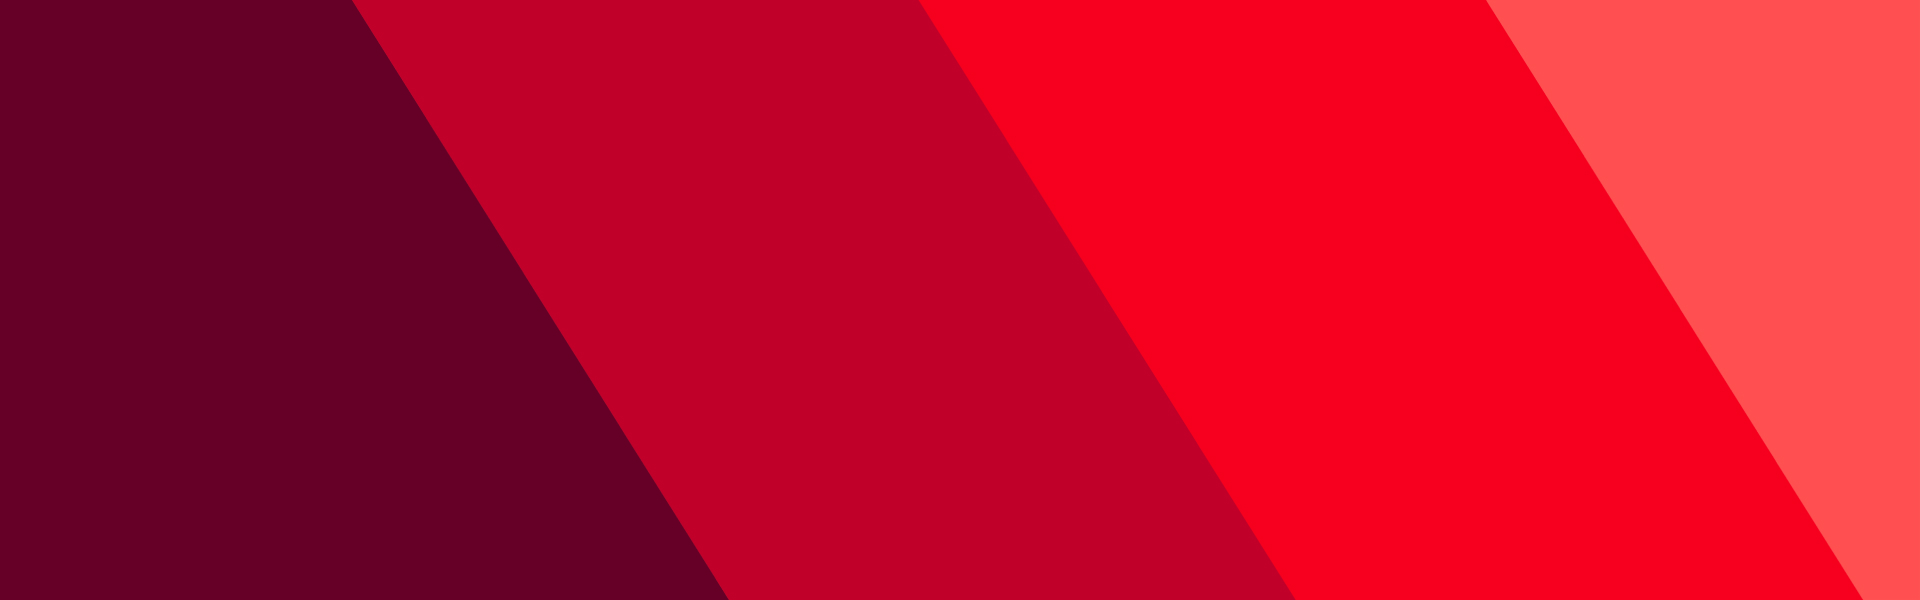 Red color gradient pattern